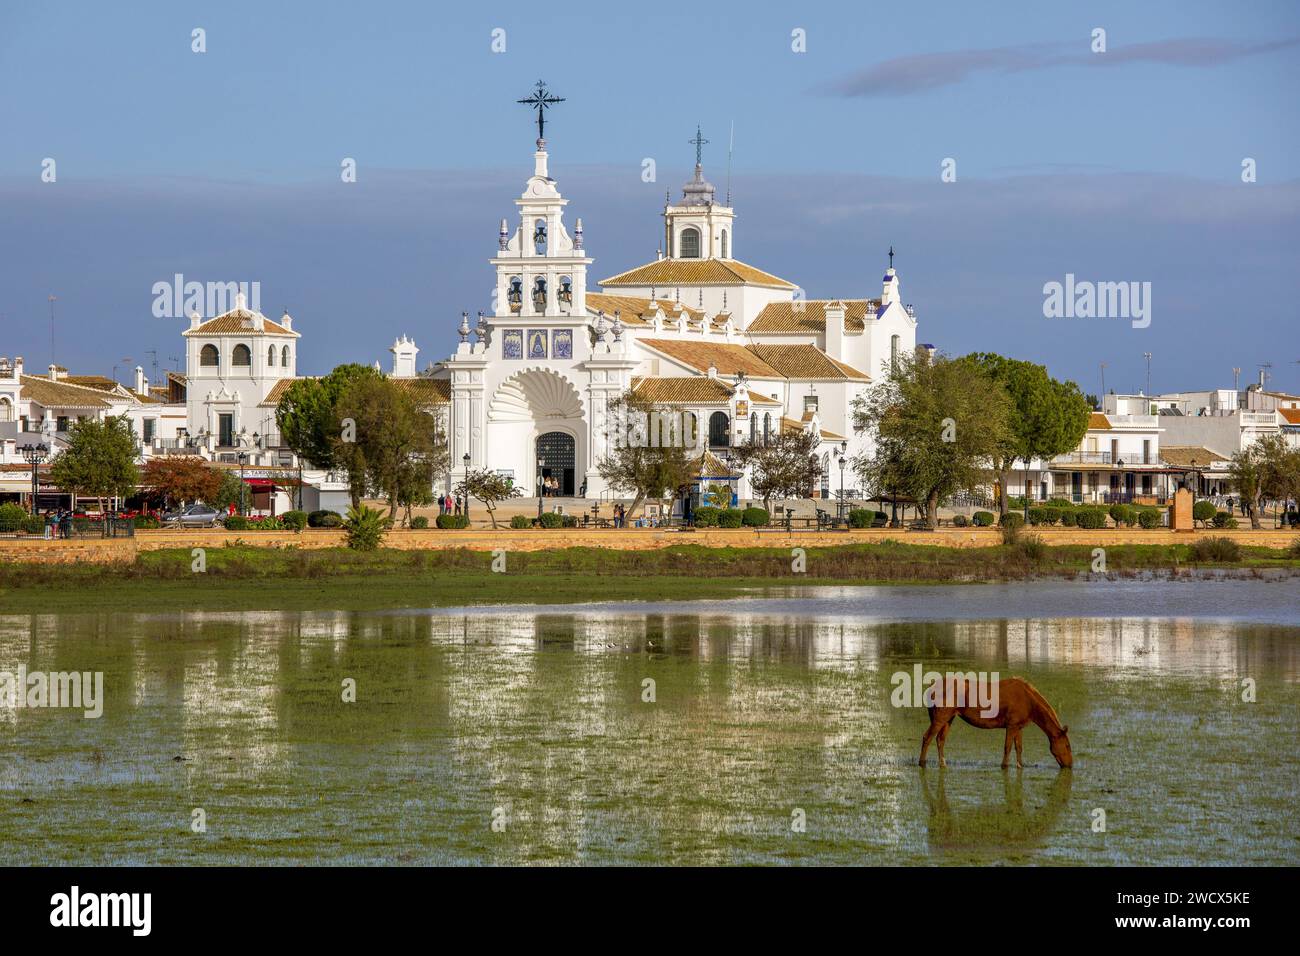 Spain, Andalusia, El Rocío, horse in the marshes in front of the main square of El Rocío where the hermitage Nuestra señora dEl Rocío stands Stock Photo